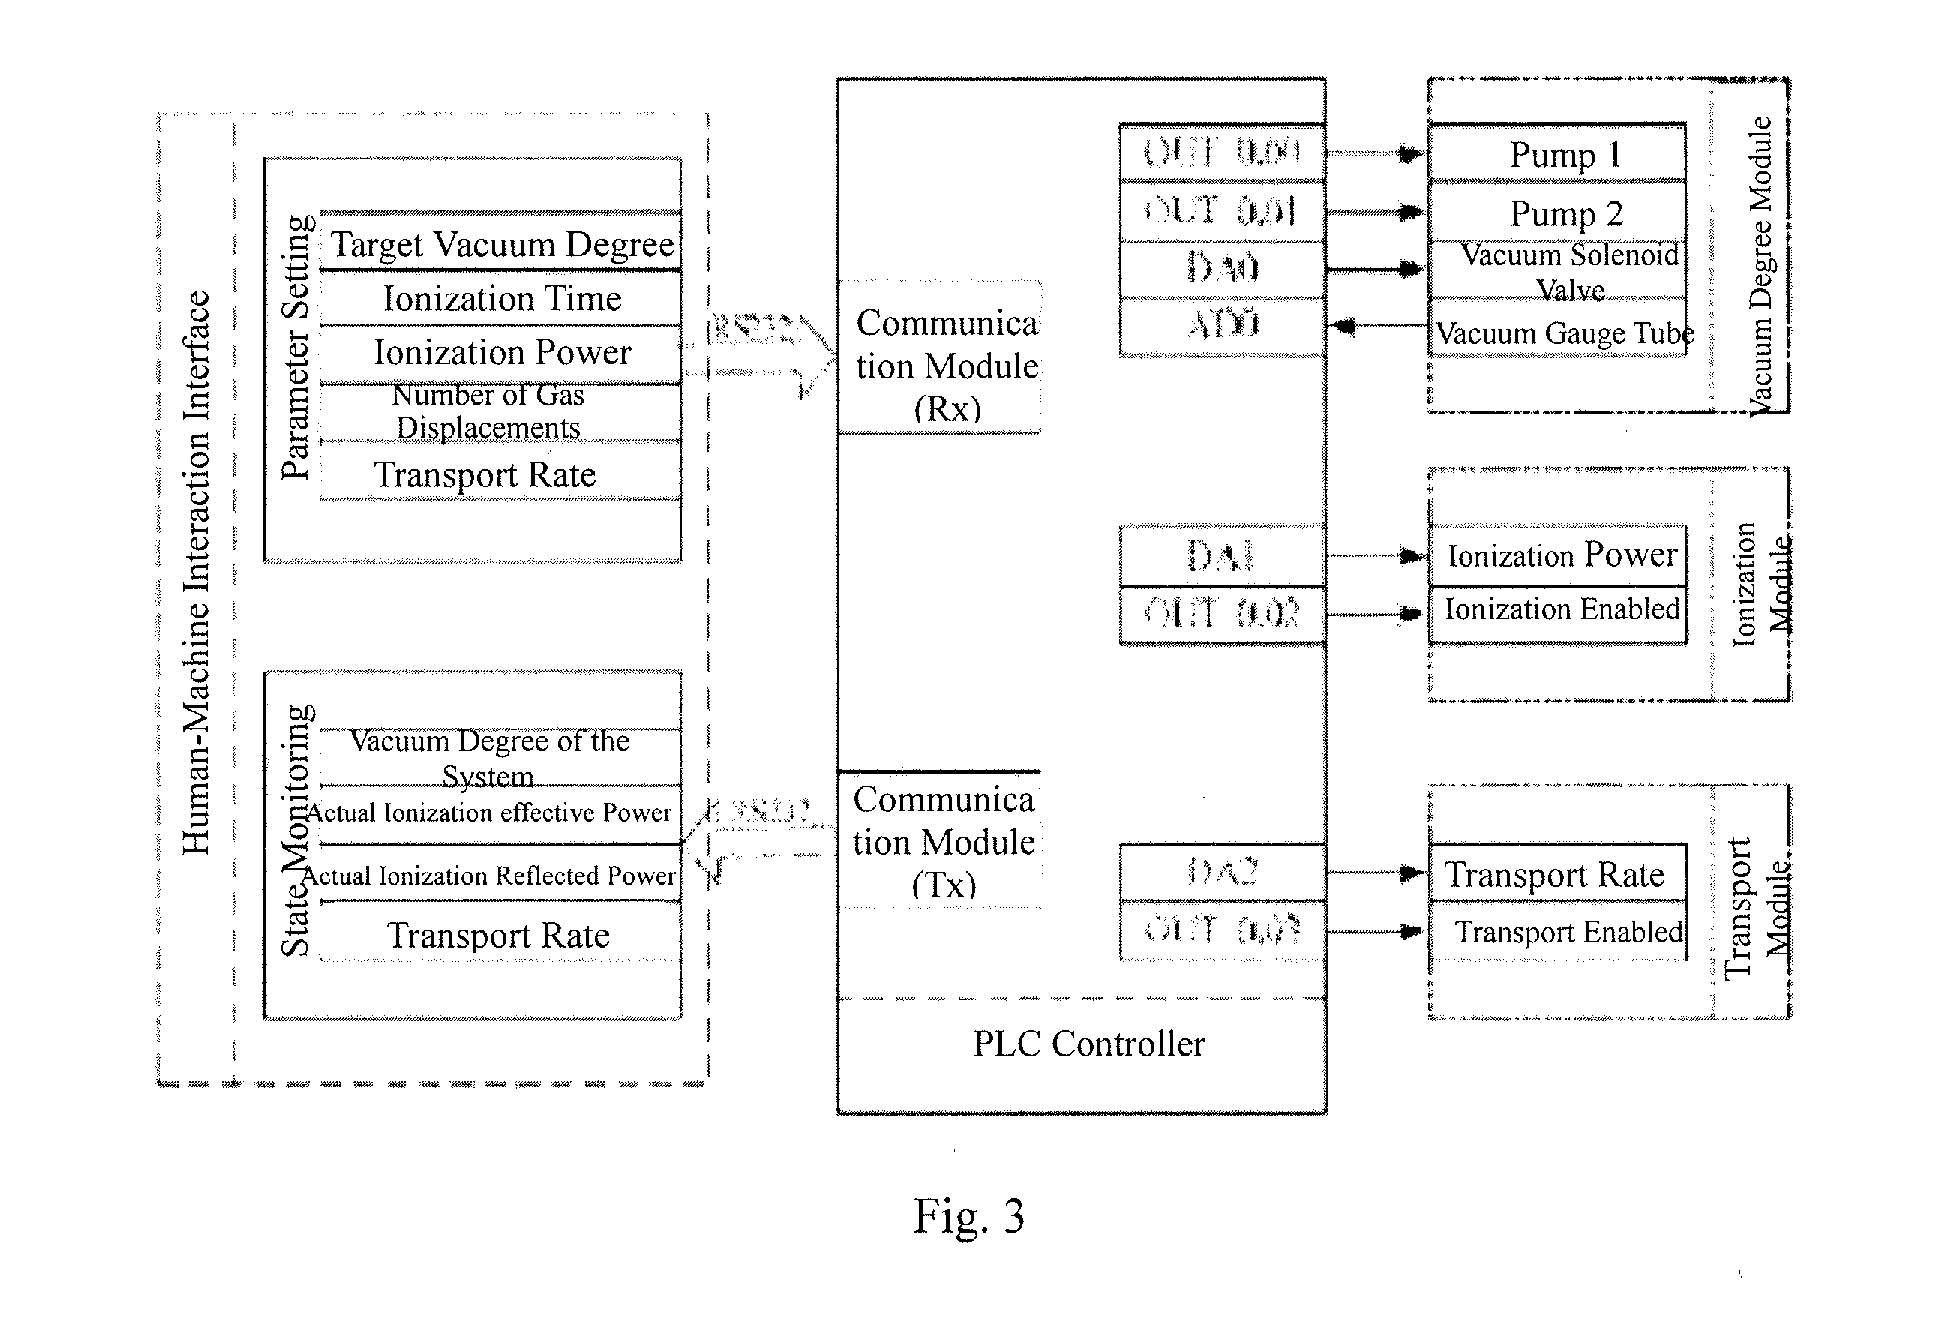 Control System of Full-Automatic Cold Plasma Seed Processor